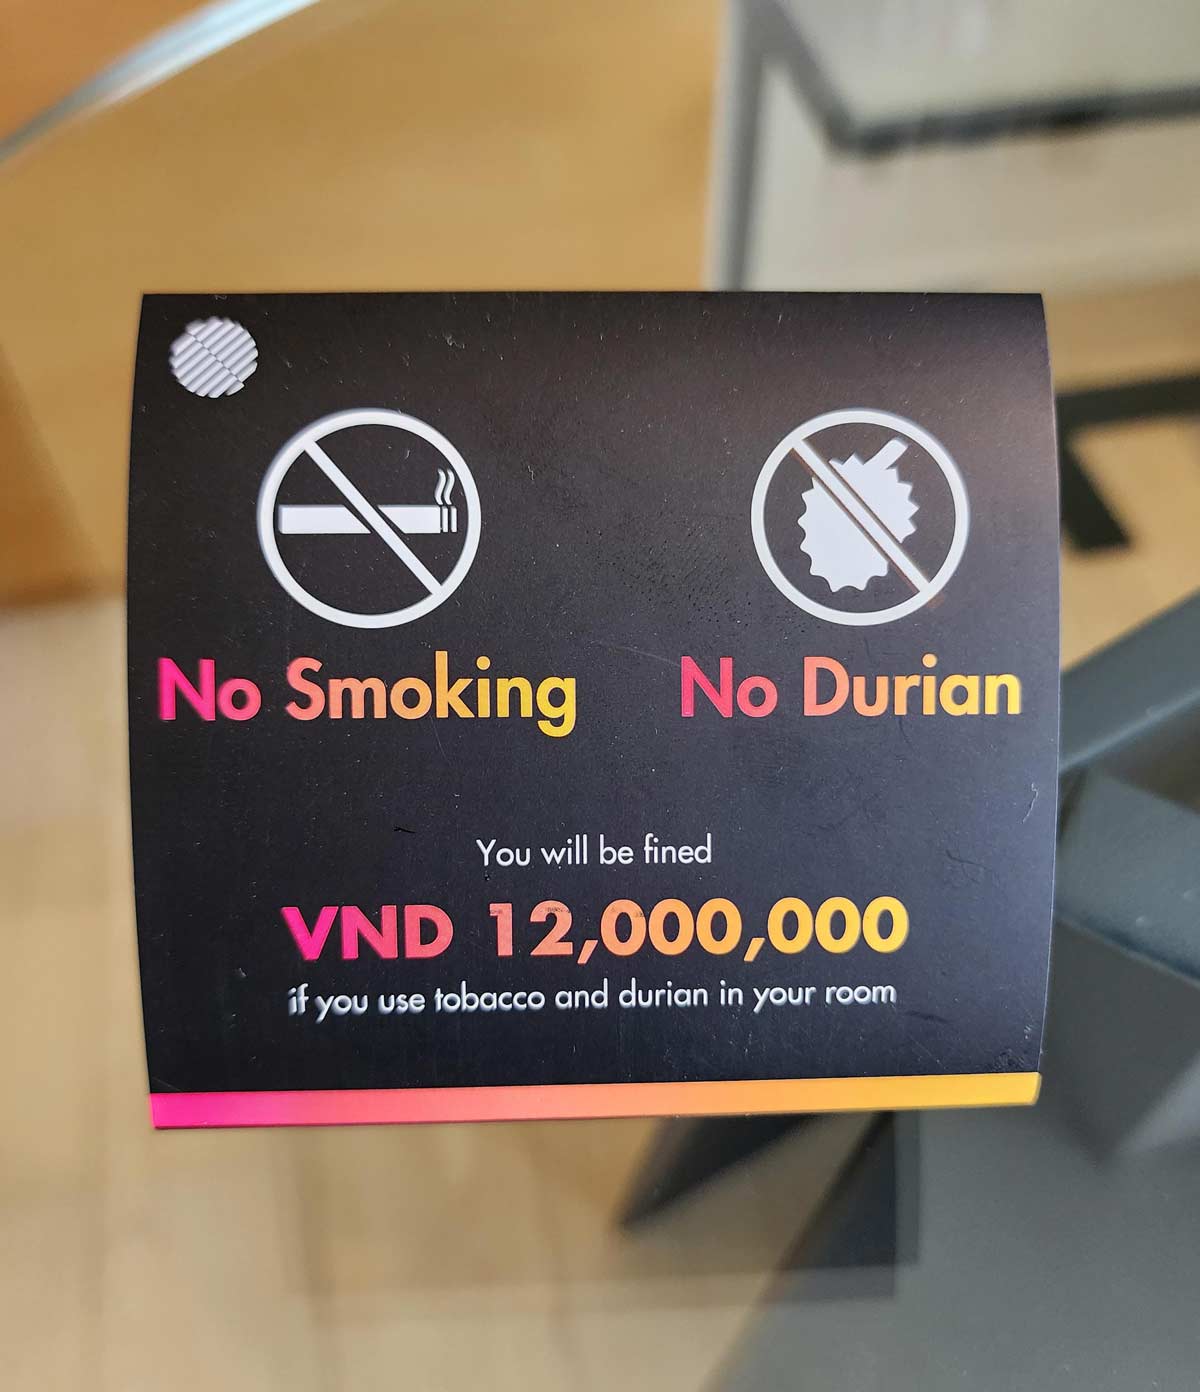 This hotel fines you for smoking or durian